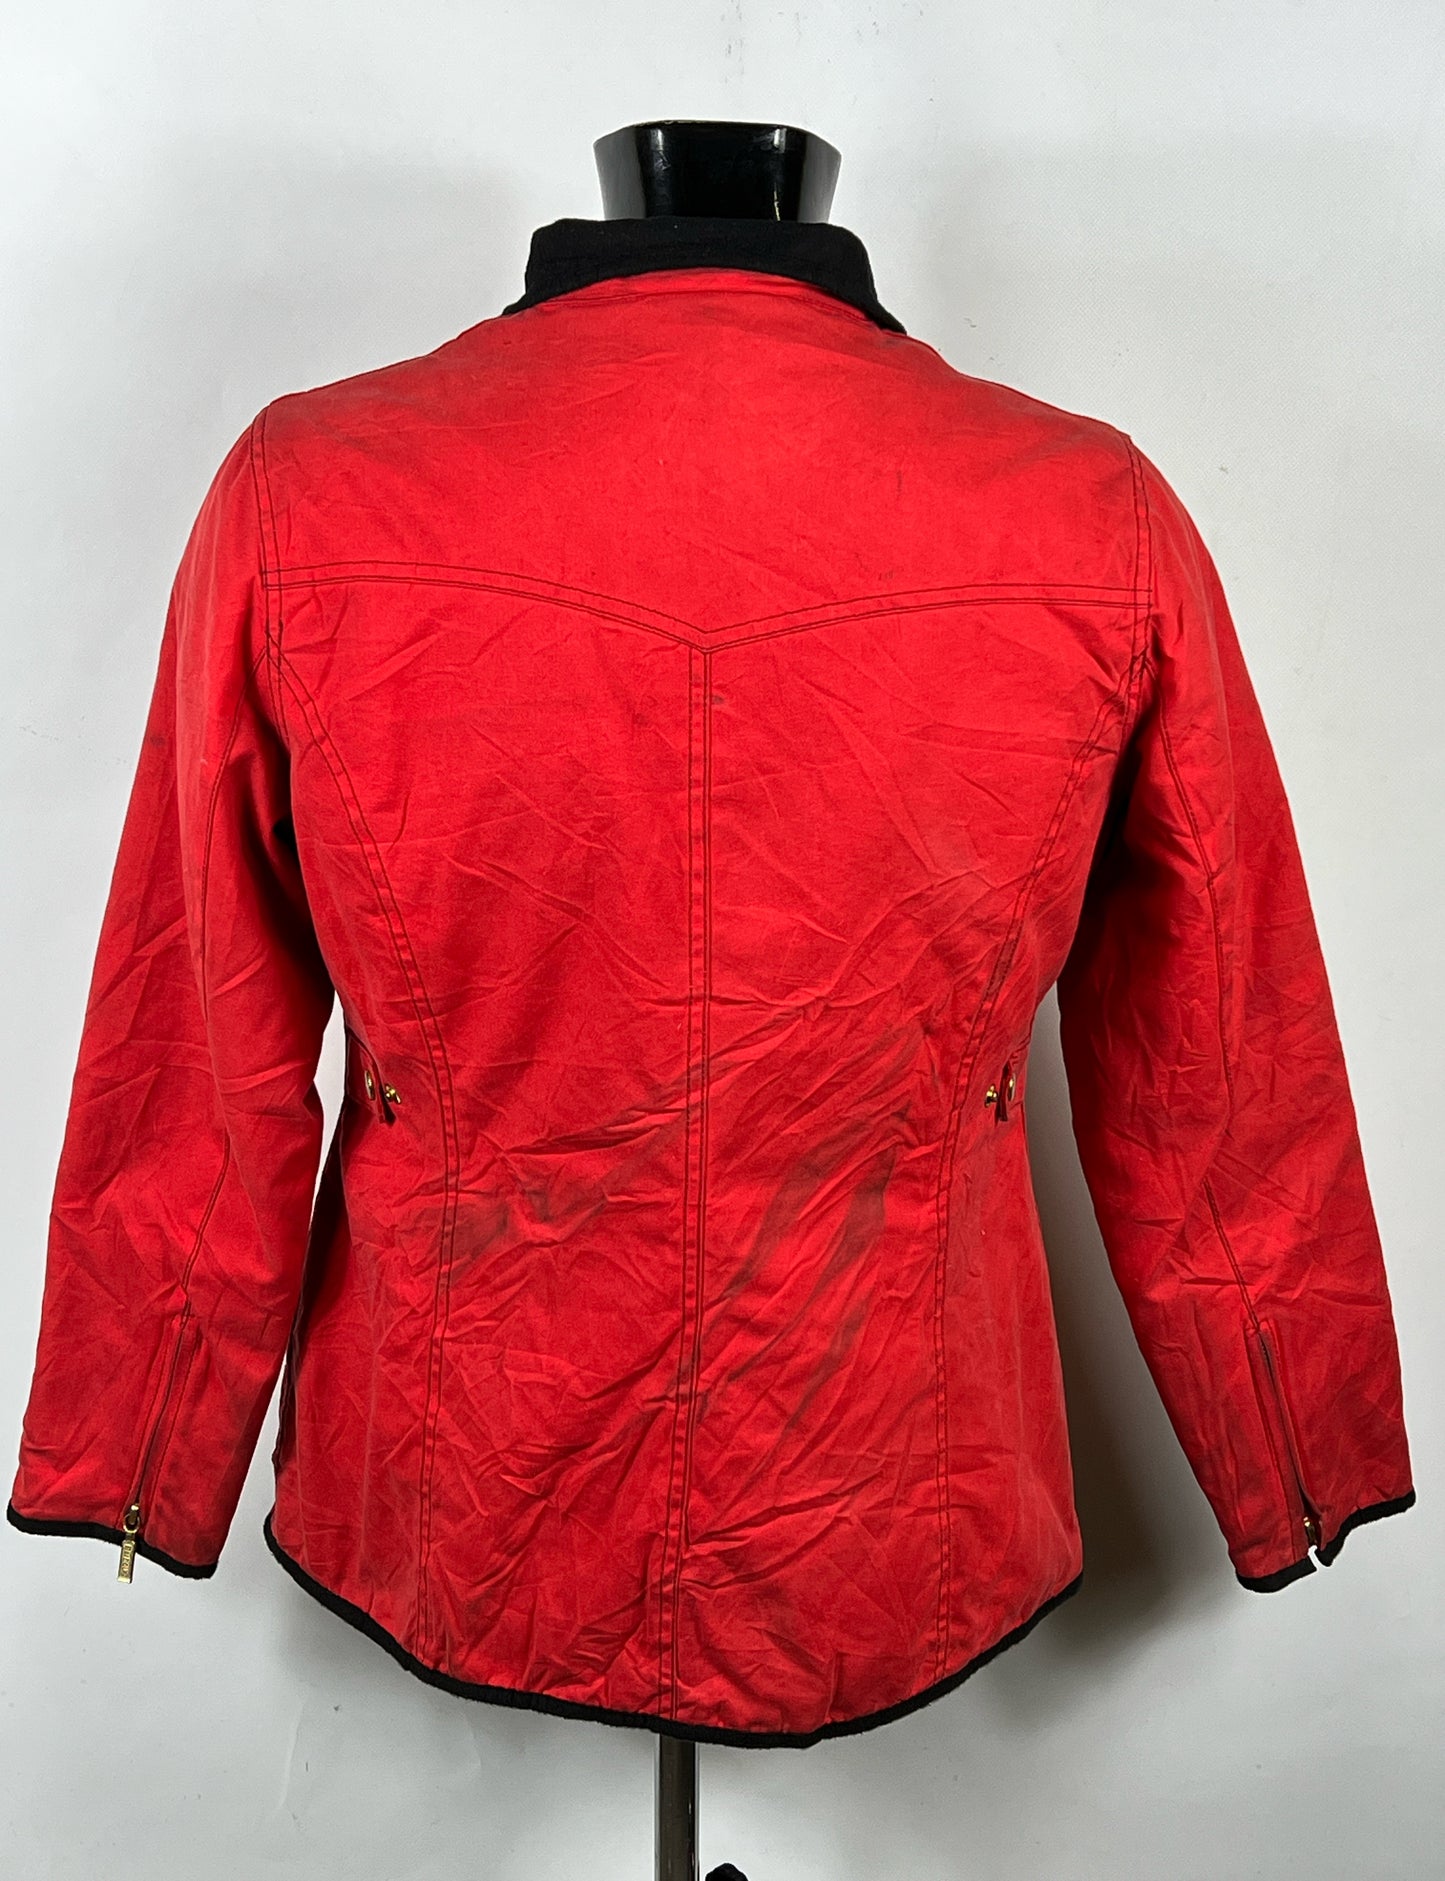 Barbour Giacca corta rossa donna Tg. 42 SMU Red Wax Utility Jacket Size UK14